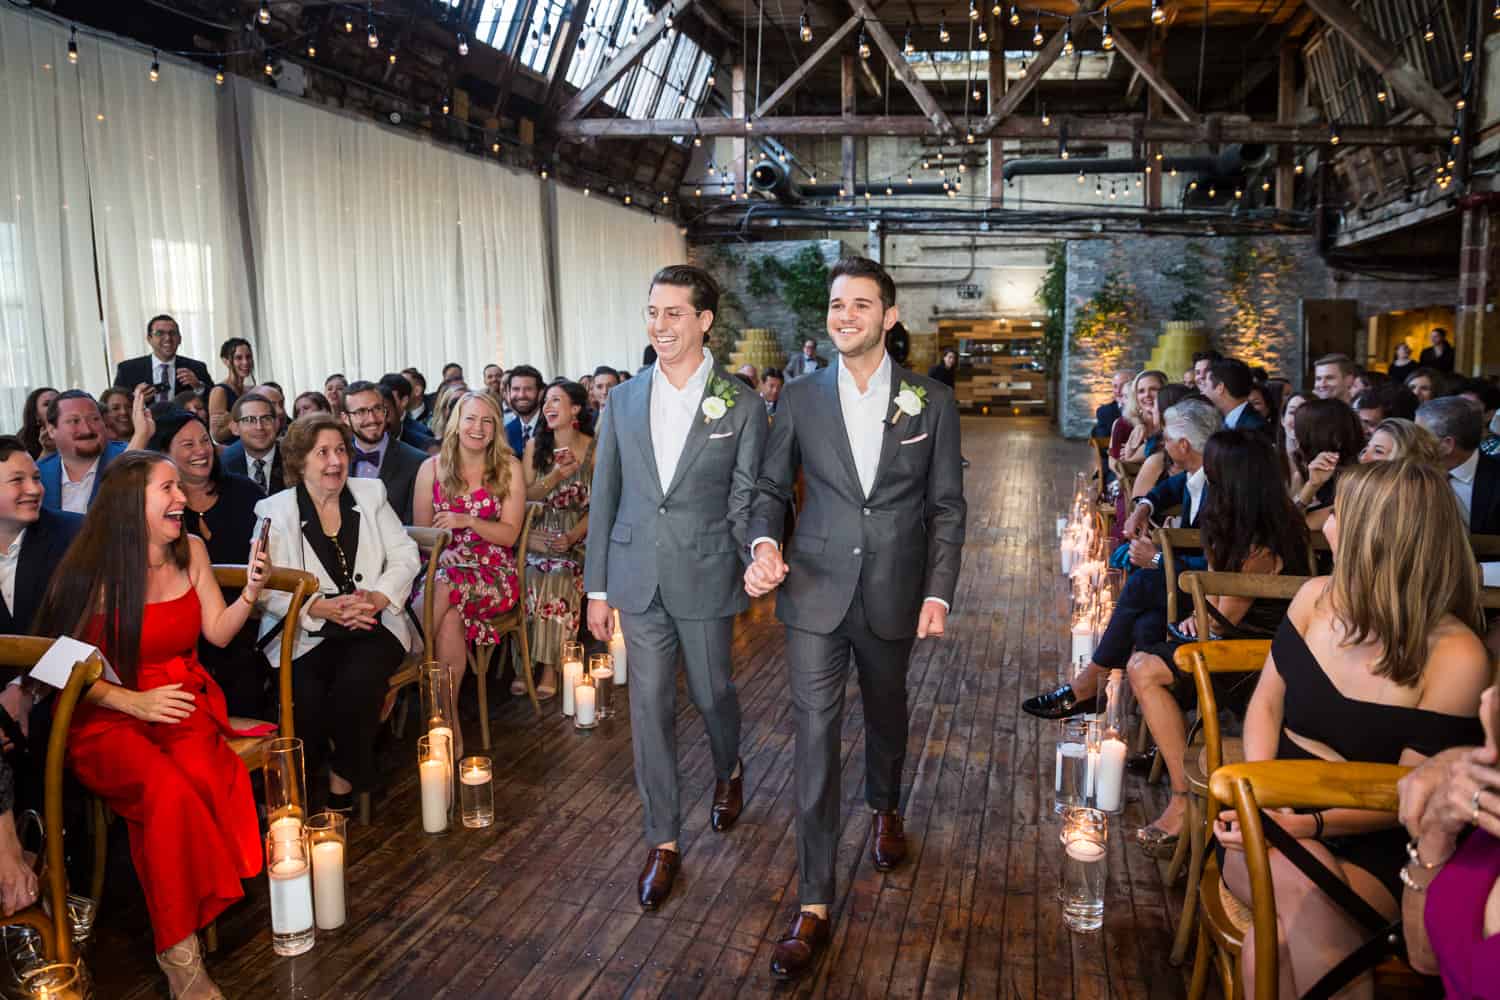 Greenpoint Loft wedding photos of two grooms walking down aisle